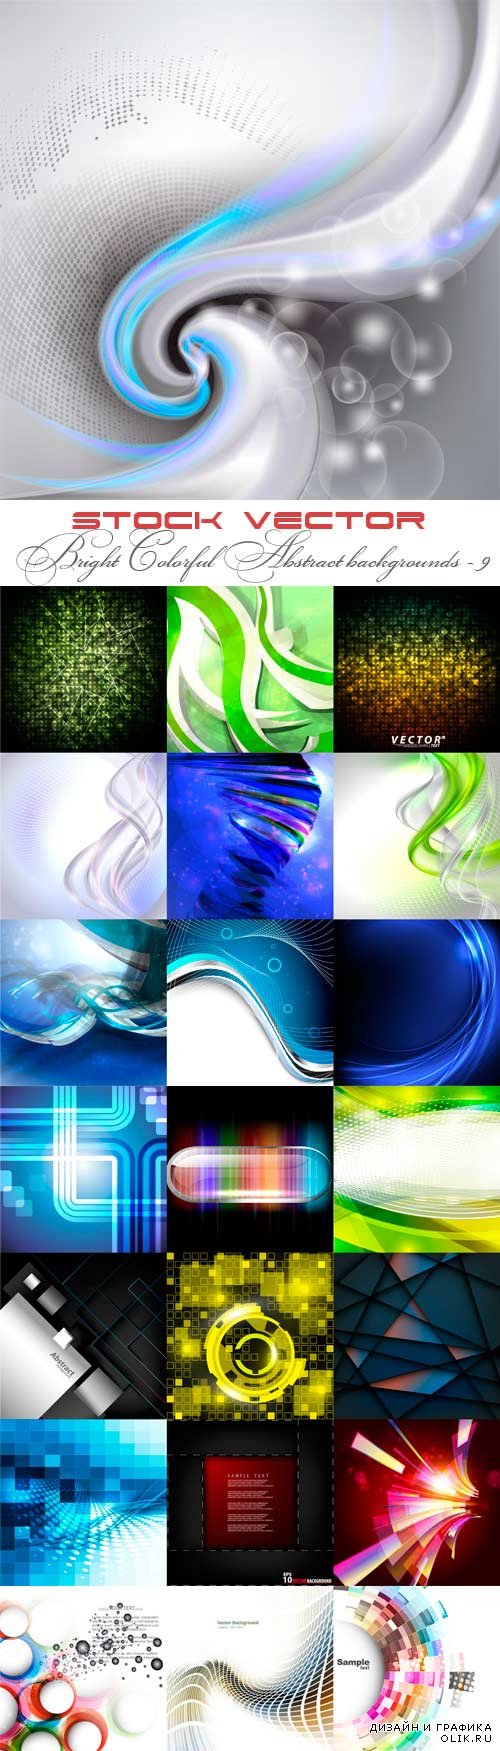 Bright colorful abstract backgrounds vector - 9